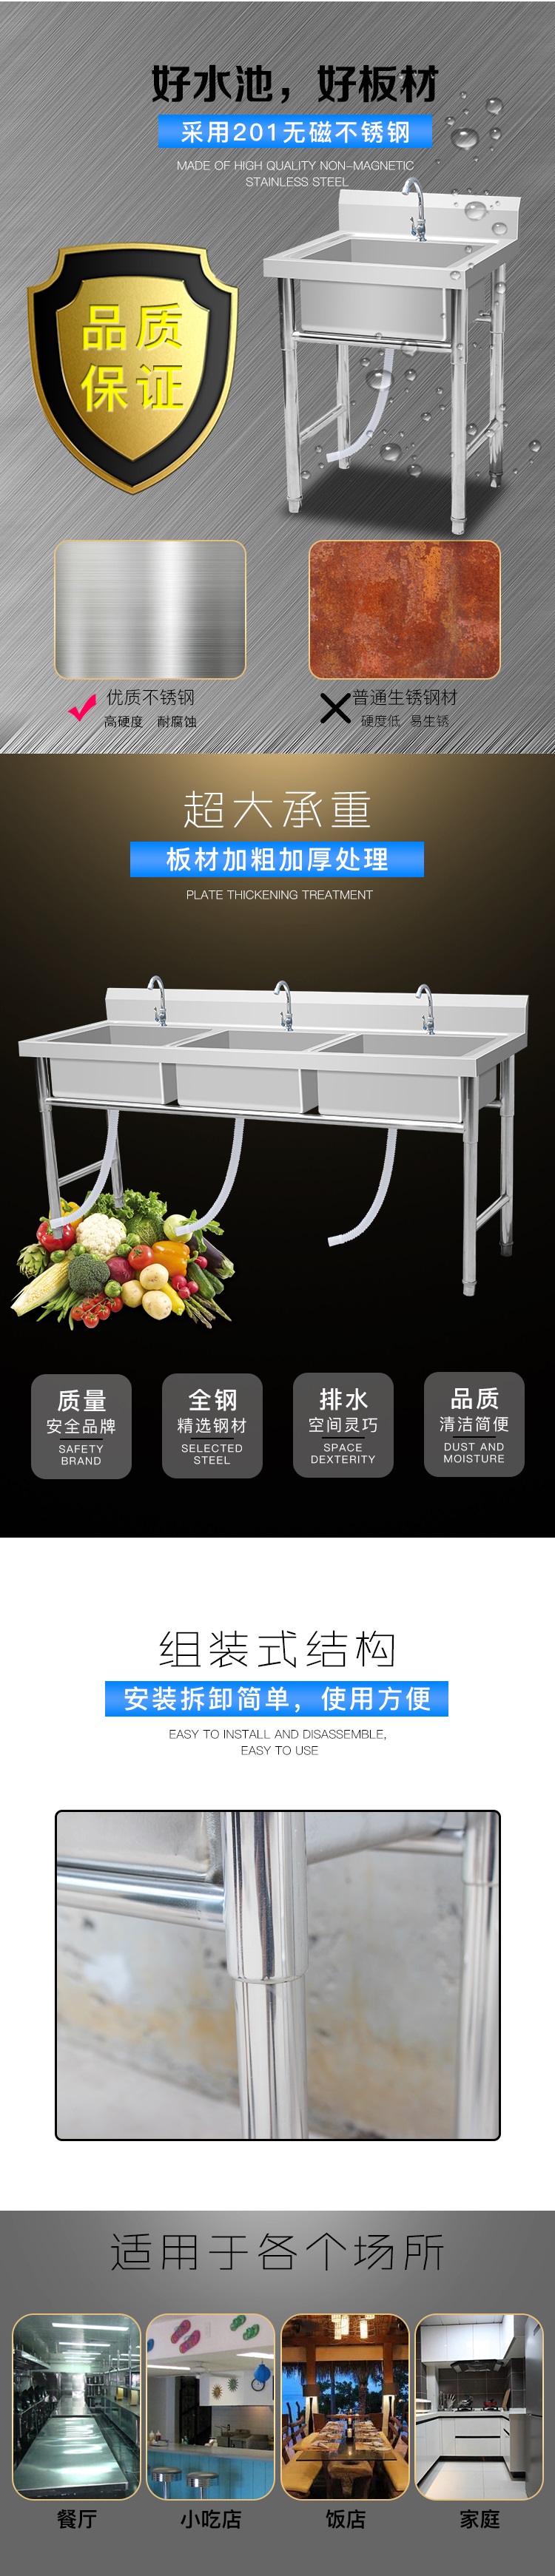 Polish kitchen stainless steel sink with bracket, simple dishwashing basin, countertop, integrated cabinet, vegetable basin, sink